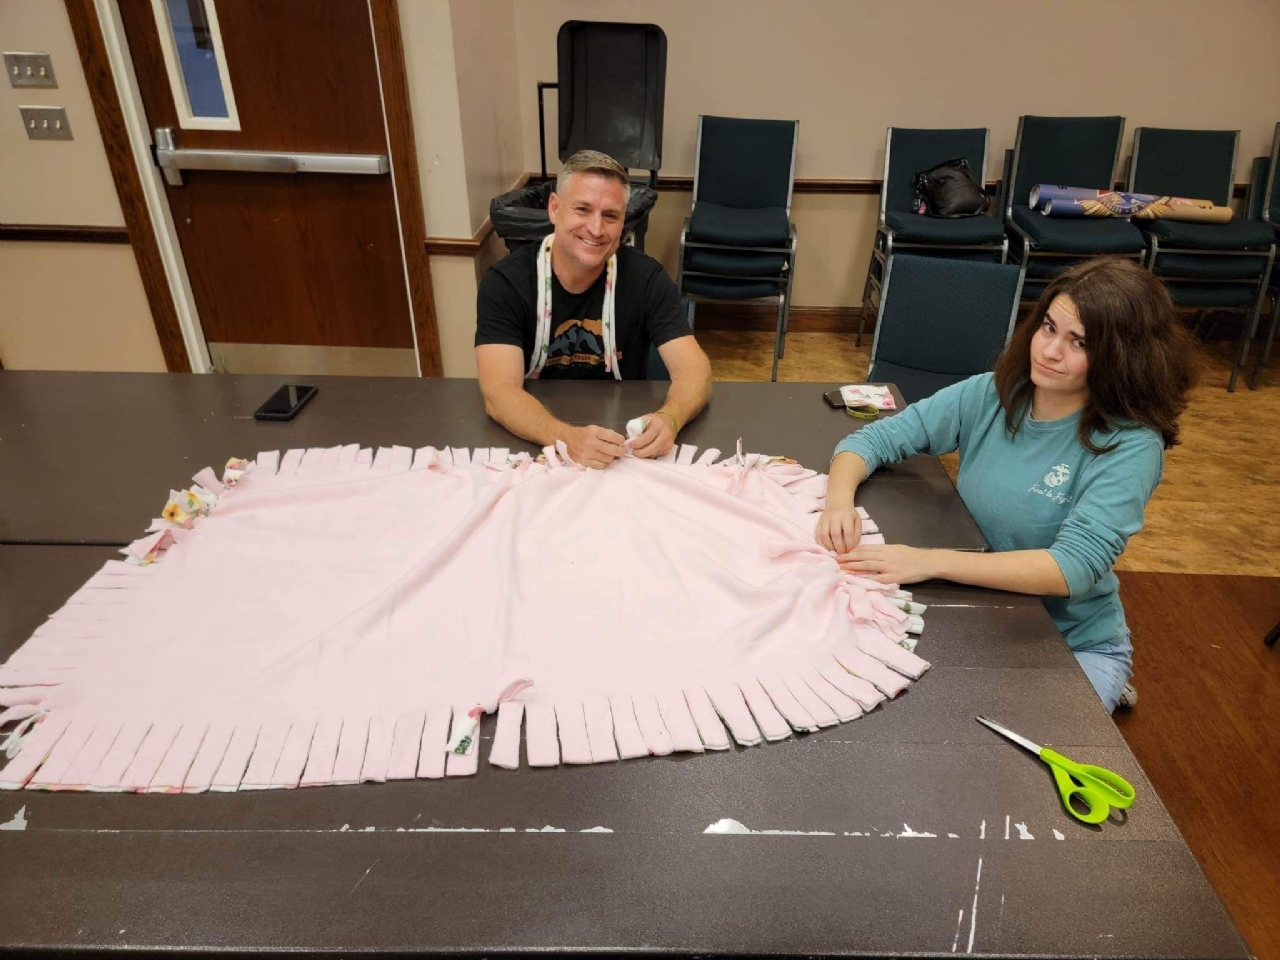 Baby Blanket making to help the Blue Star Mothers of Tampa Bay. The blankets will be brought to baby showers for Military members and Families.